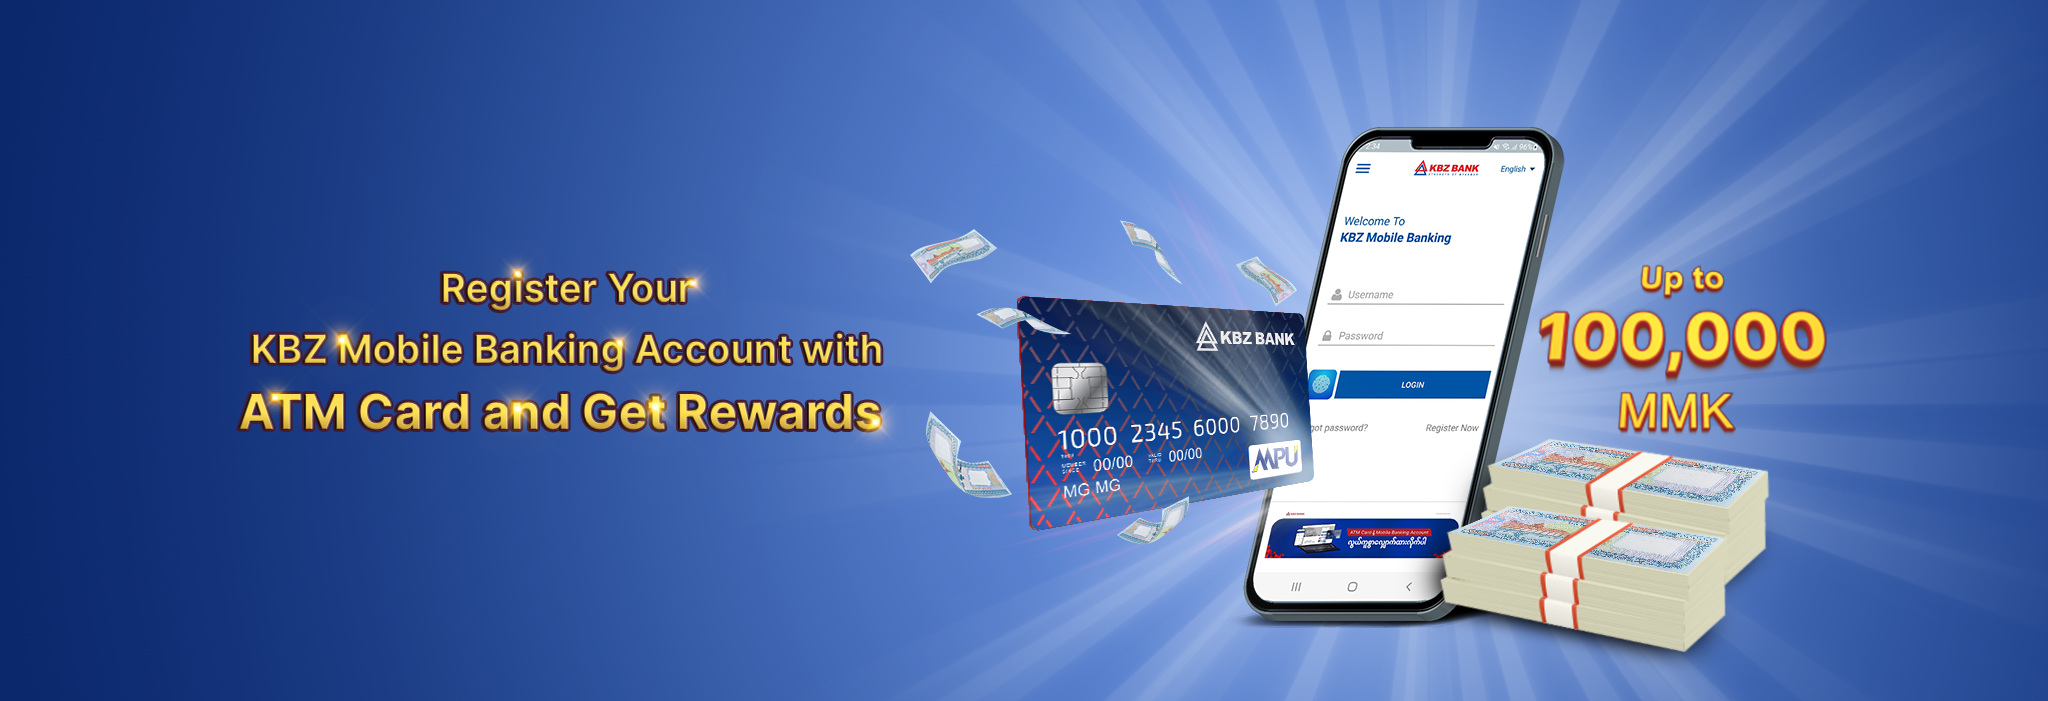 Register your KBZ Mobile Banking Account with ATM Card and get Rewards